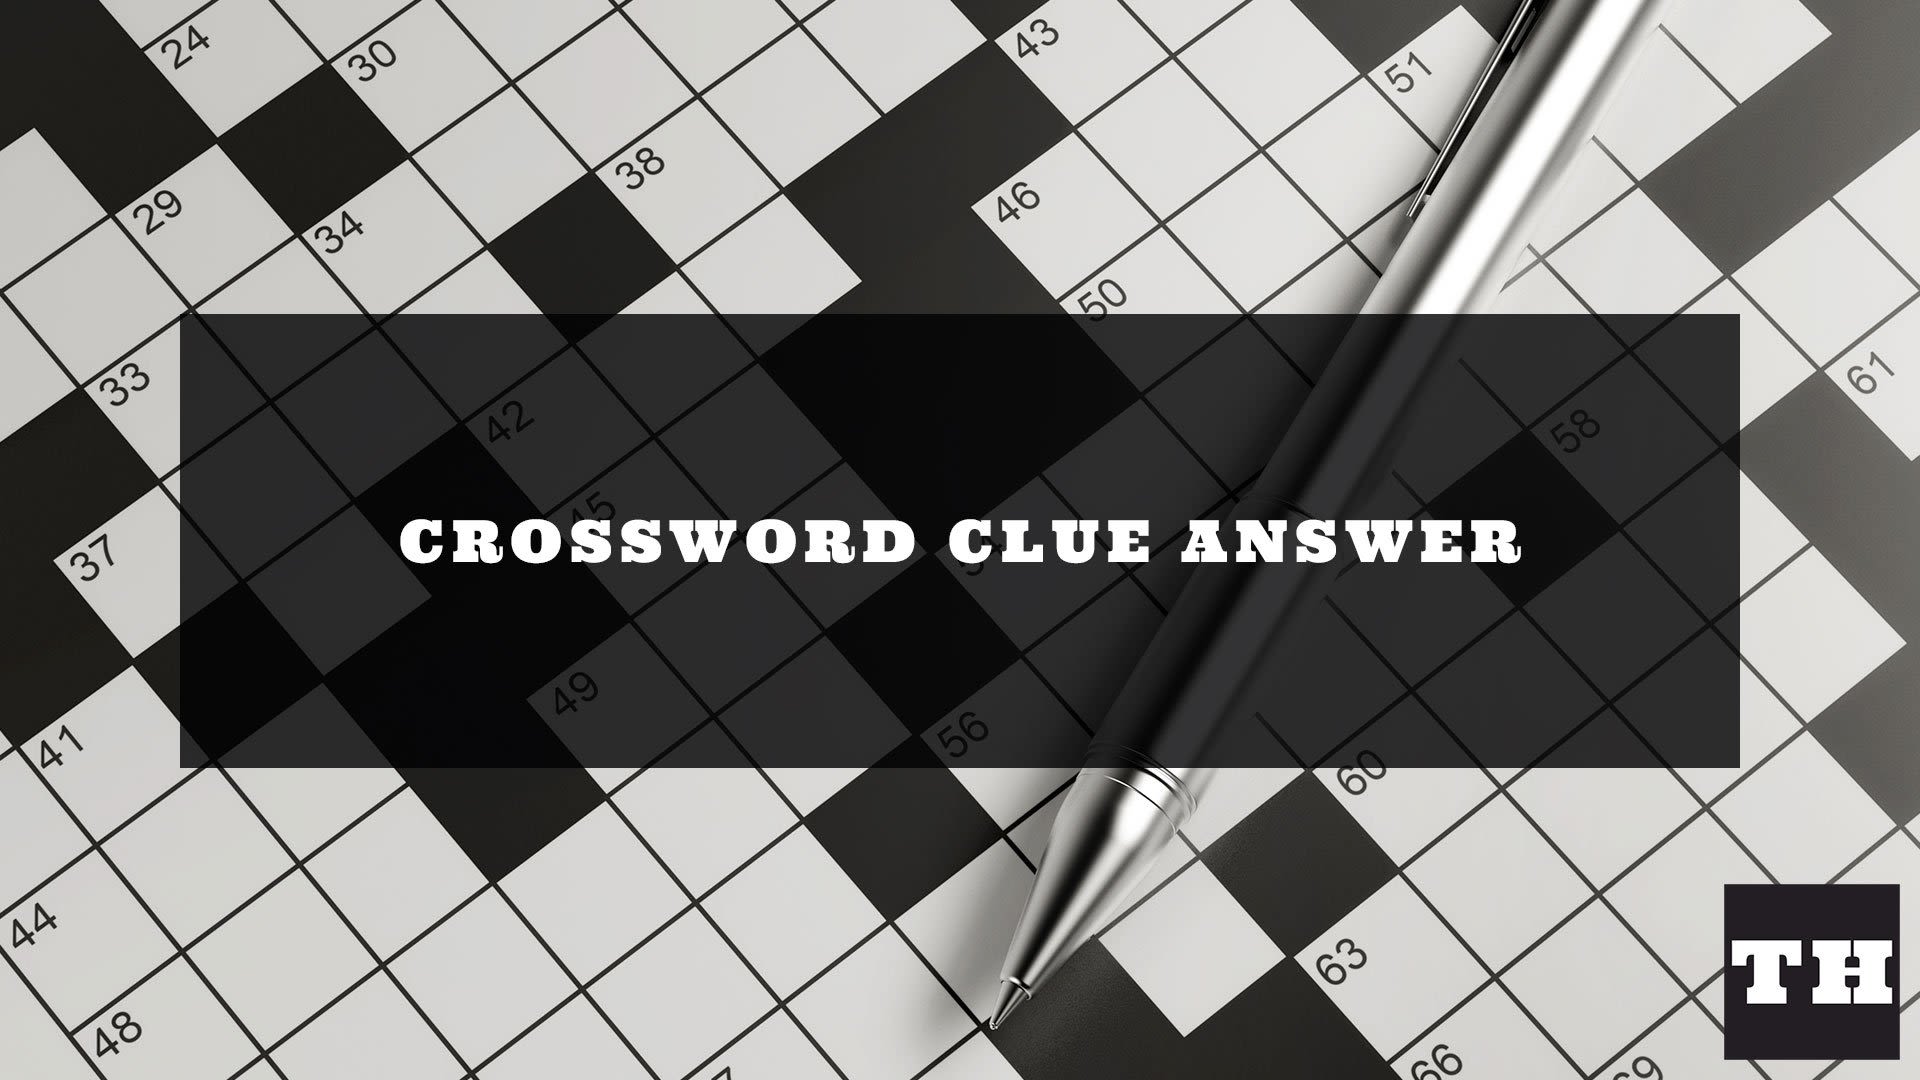 Car rental agency Crossword Clue - Try Hard Guides